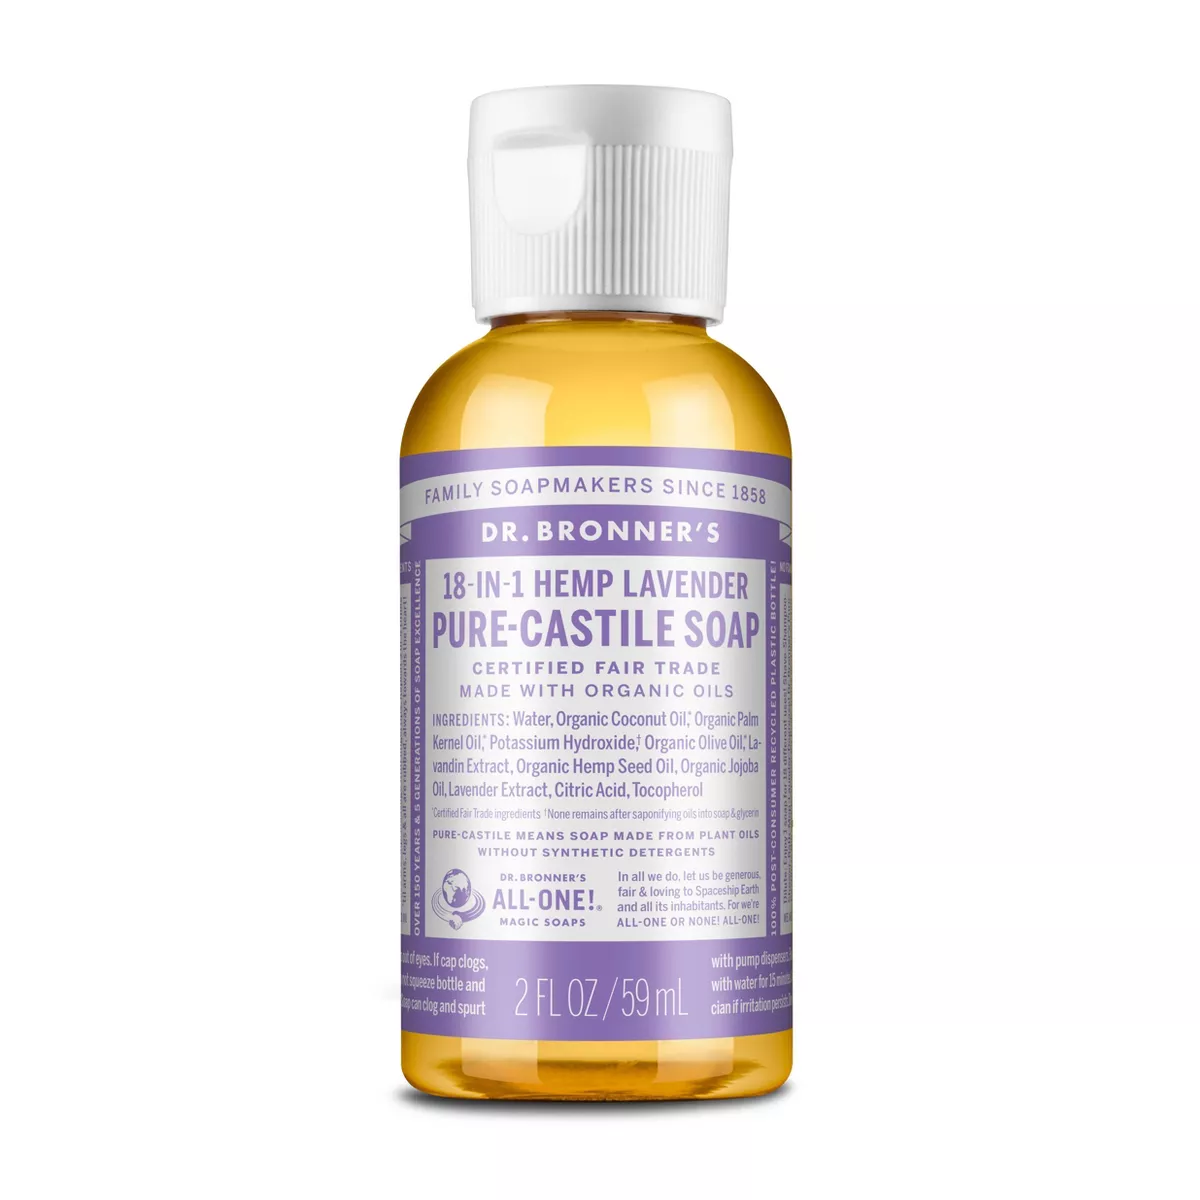 Dr. Bronner's - Pure-Castile Liquid Soap (Lavender, 2 ounce) - Made with Organic Oils, 18-in-1 Uses: Face, Body, Hair, Laundry, Pets and Dishes, Concentrated, Vegan, Non-GMO